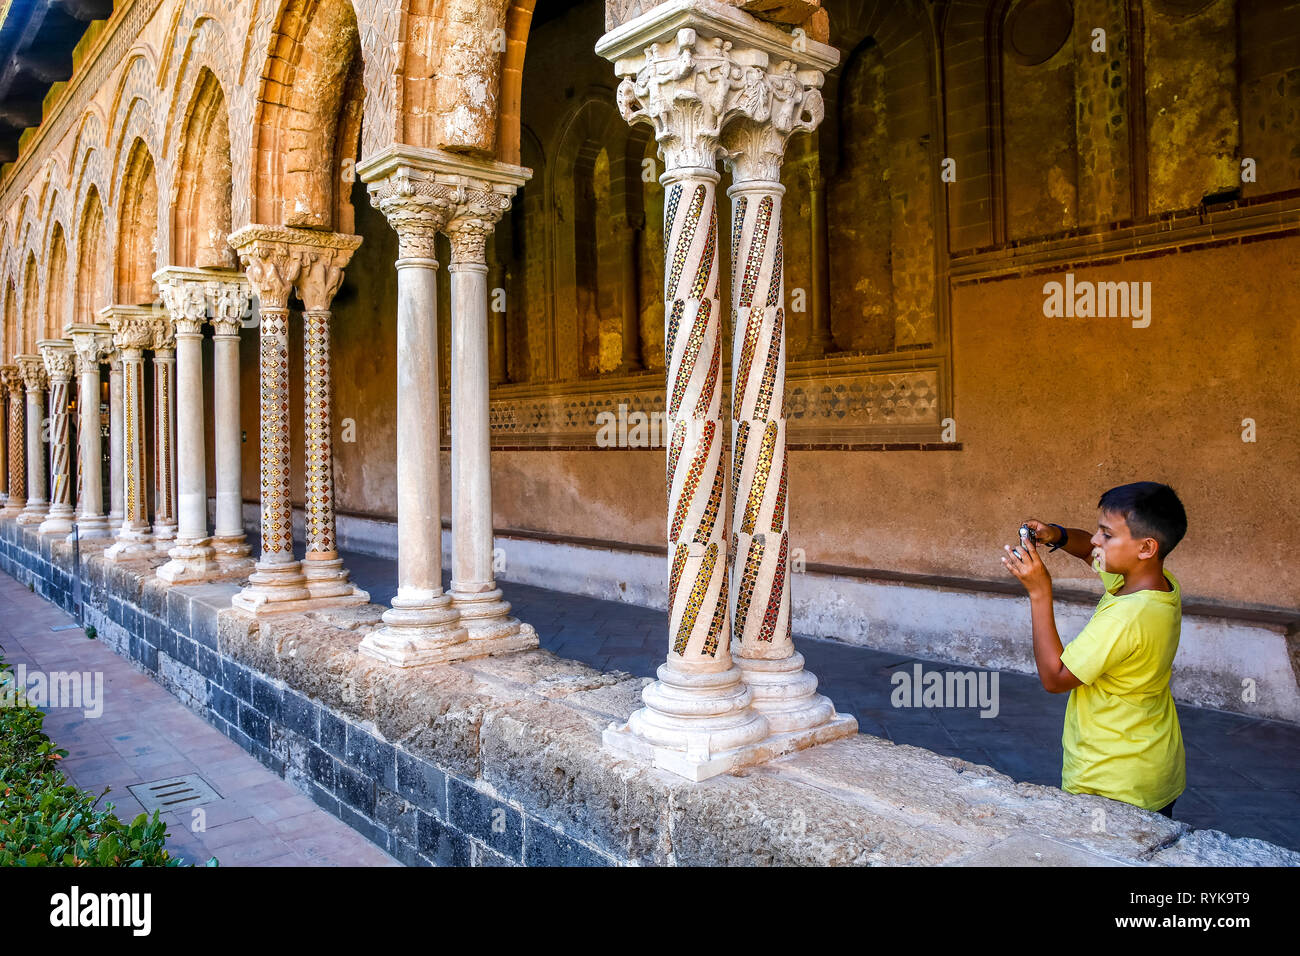 12-year-old boy taking a photograph in the cloister of Monreale cathedral, Sicily (Italy). Stock Photo